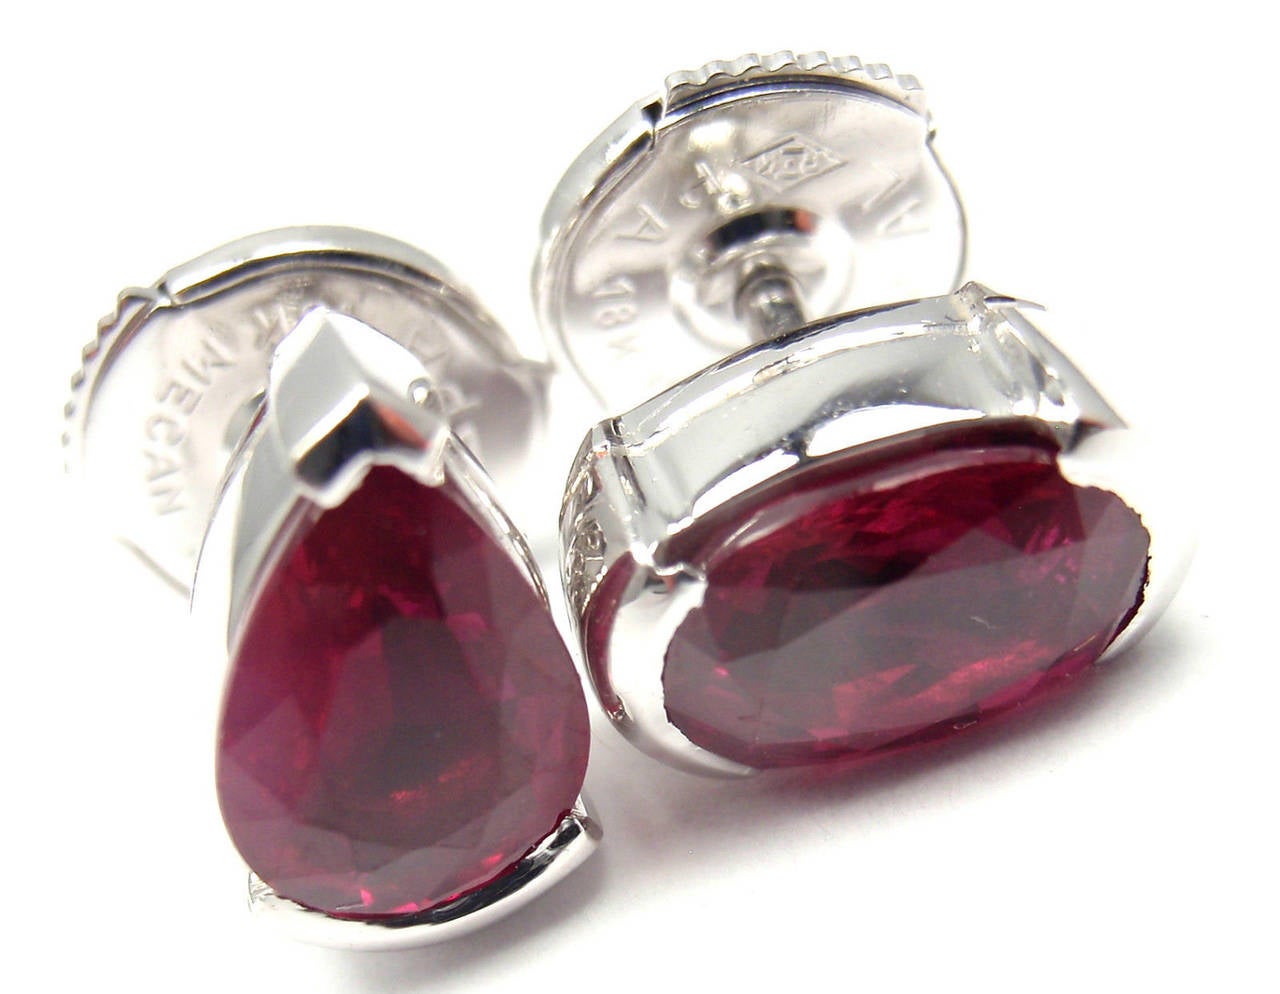 18k White Gold Ruby Stud Meli Melo Earrings by Cartier.
With 1 pear shape no heat ruby 9mm x 5mm
1 oval shape no heat ruby 9mm x 5mm

Details:
Measurements: 9mm x 5mm
Weight: 3.8 grams
Stamped Hallmarks: Cartier, 750, 1522
*Free Shipping